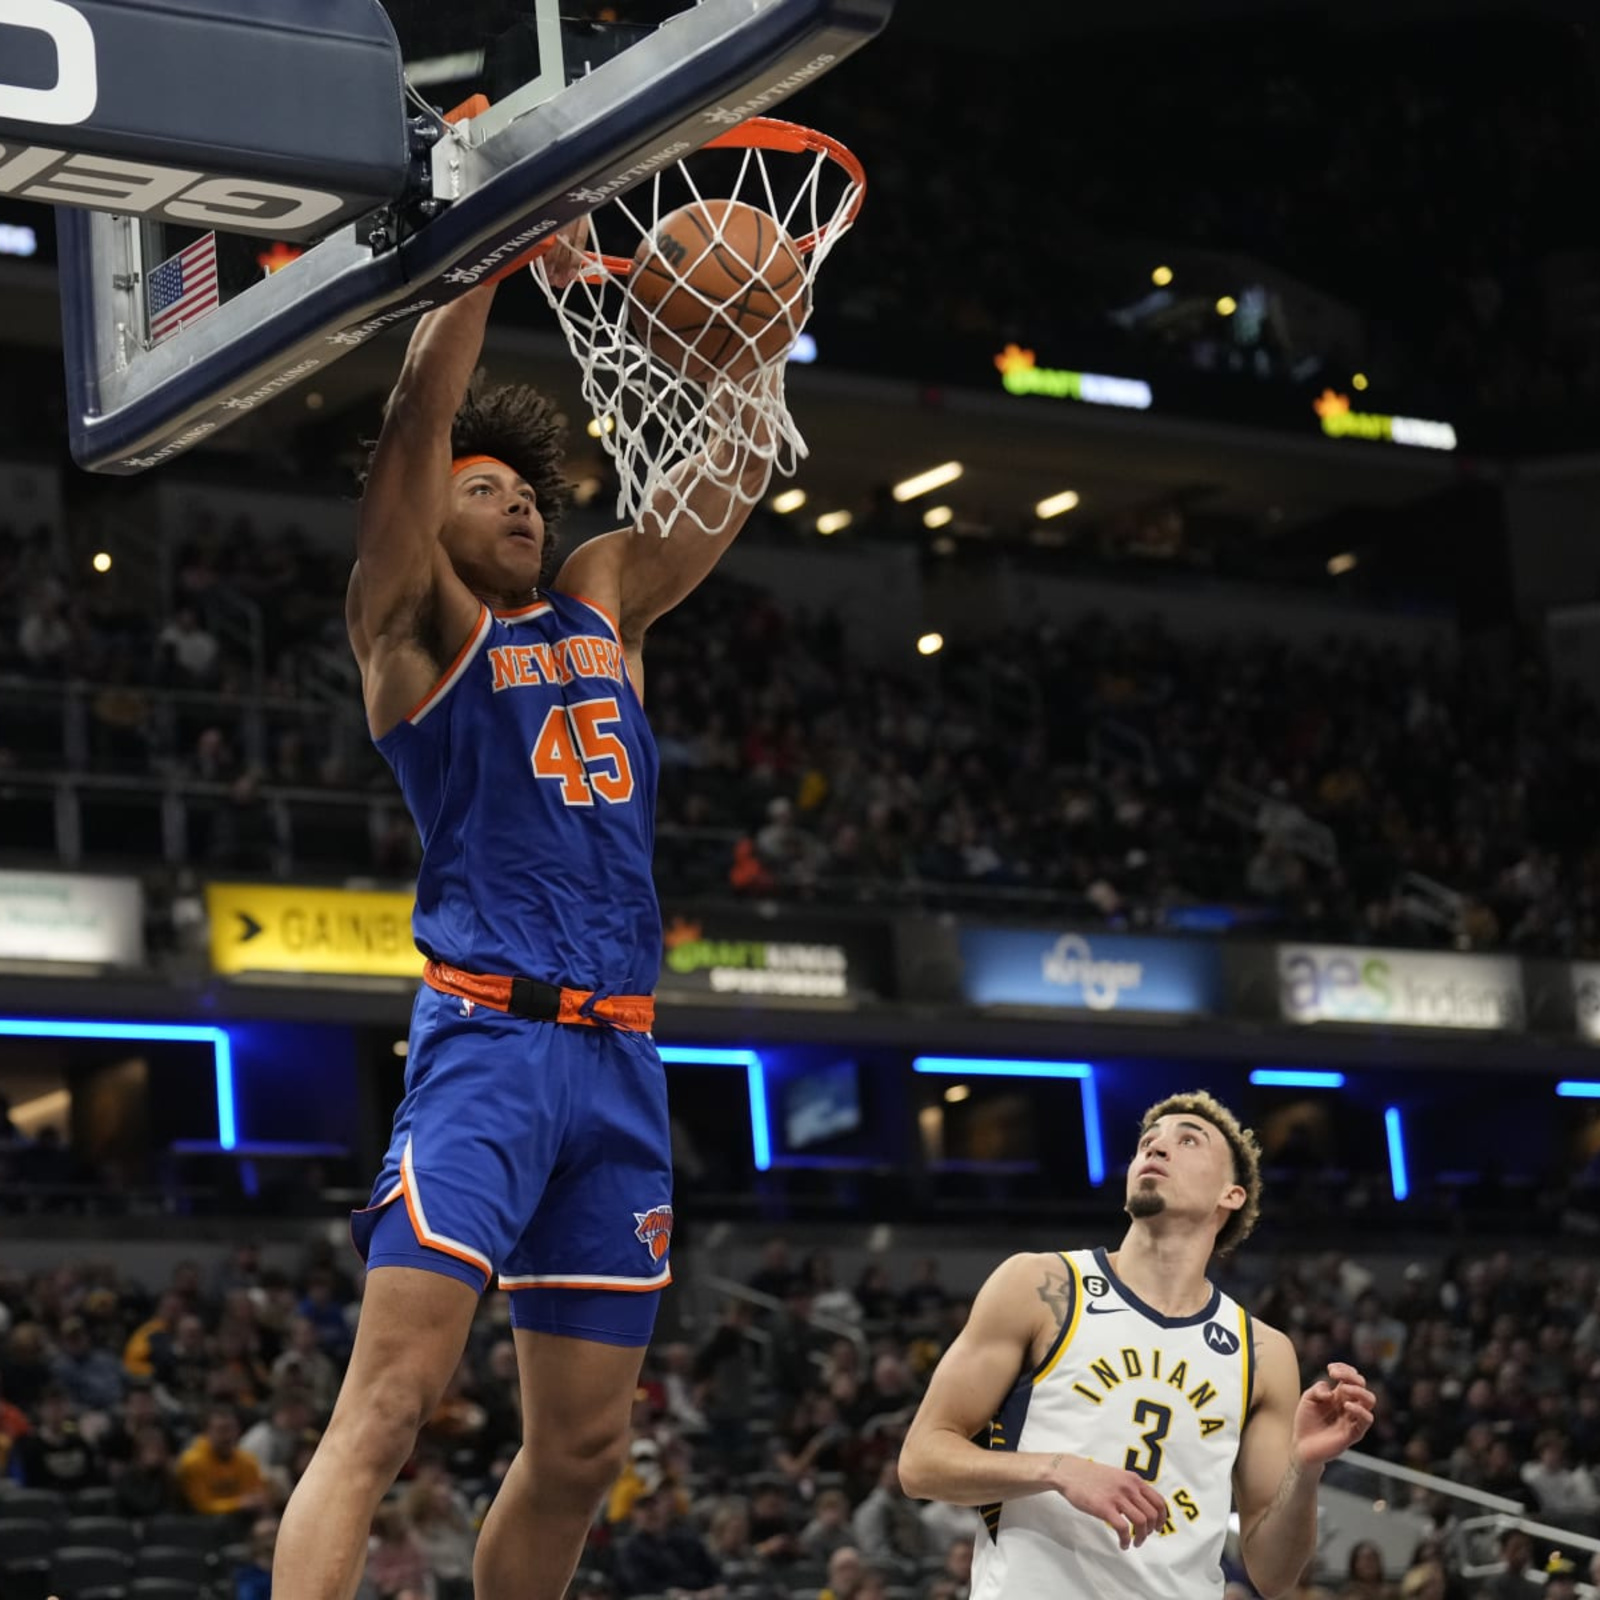 Watch LeBron dunk all over the Knicks